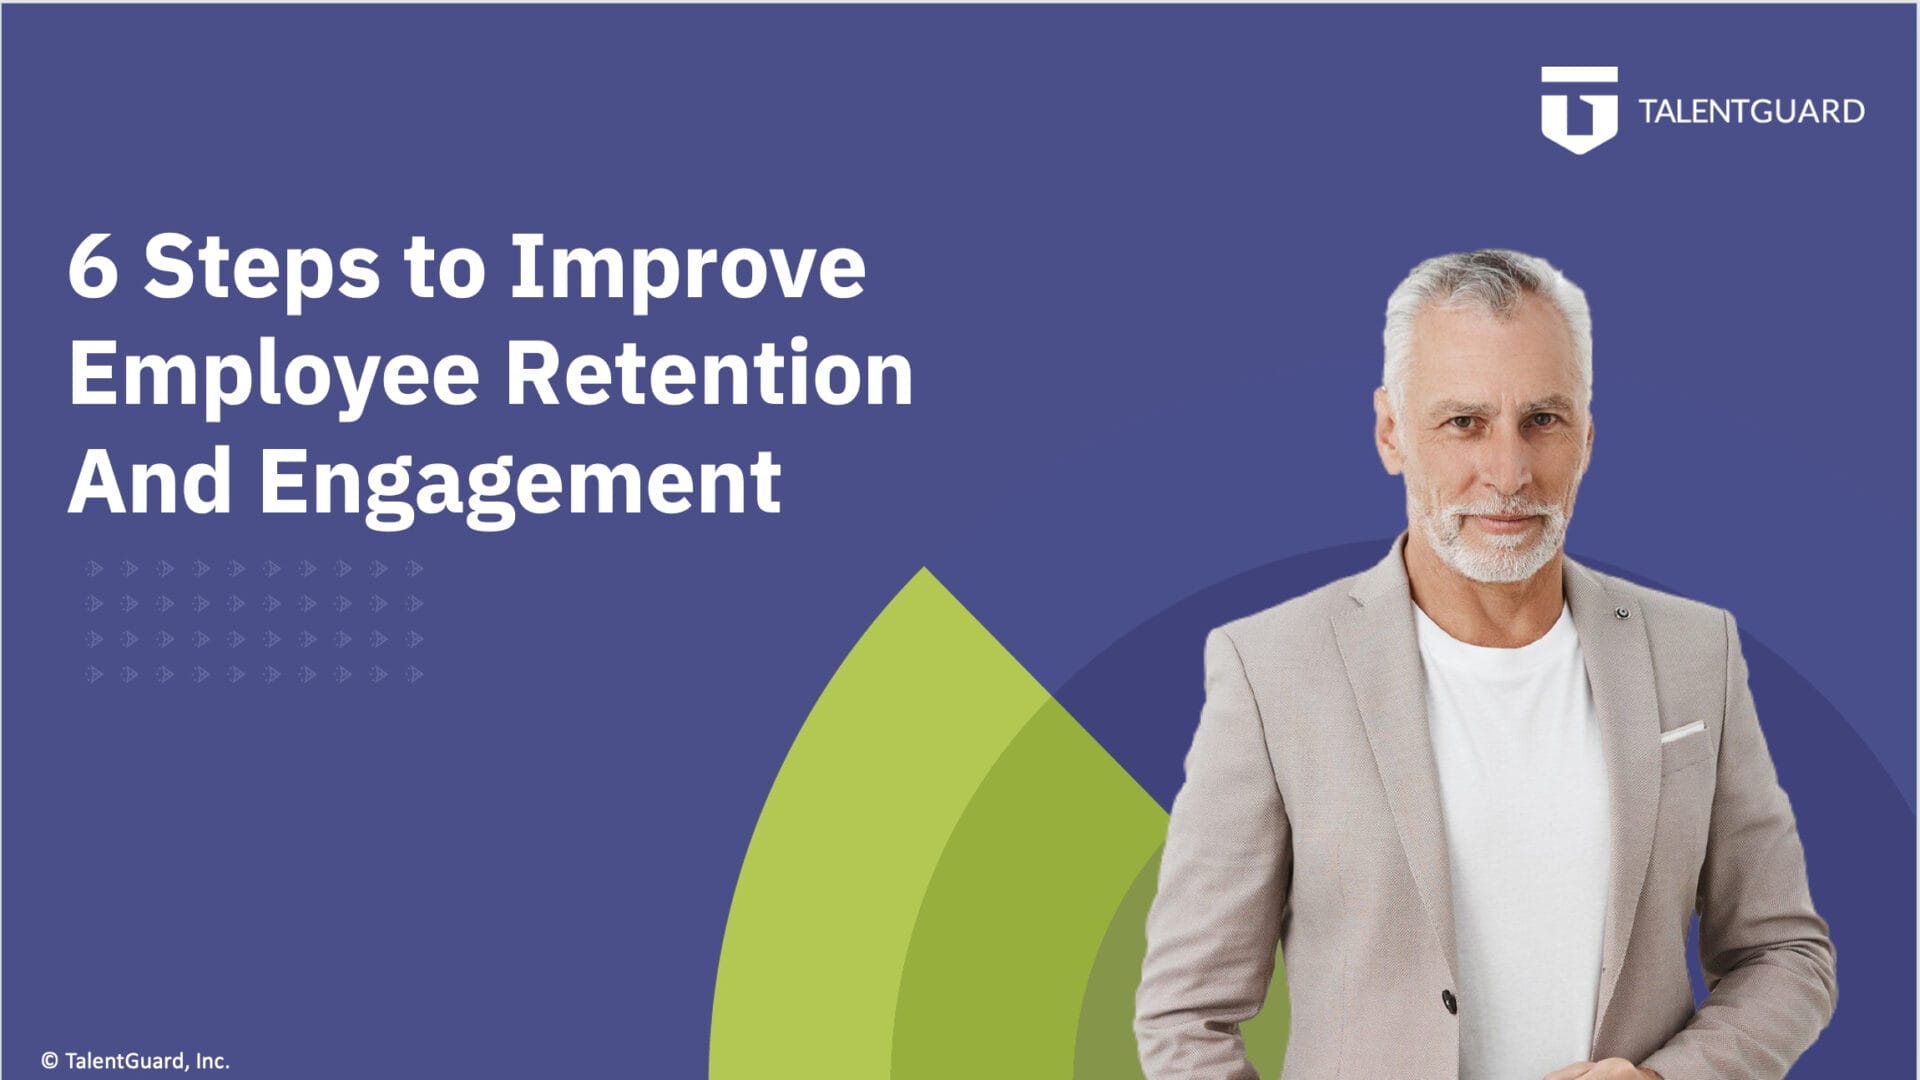 6 Steps to Improve Employee Engagement and Retention